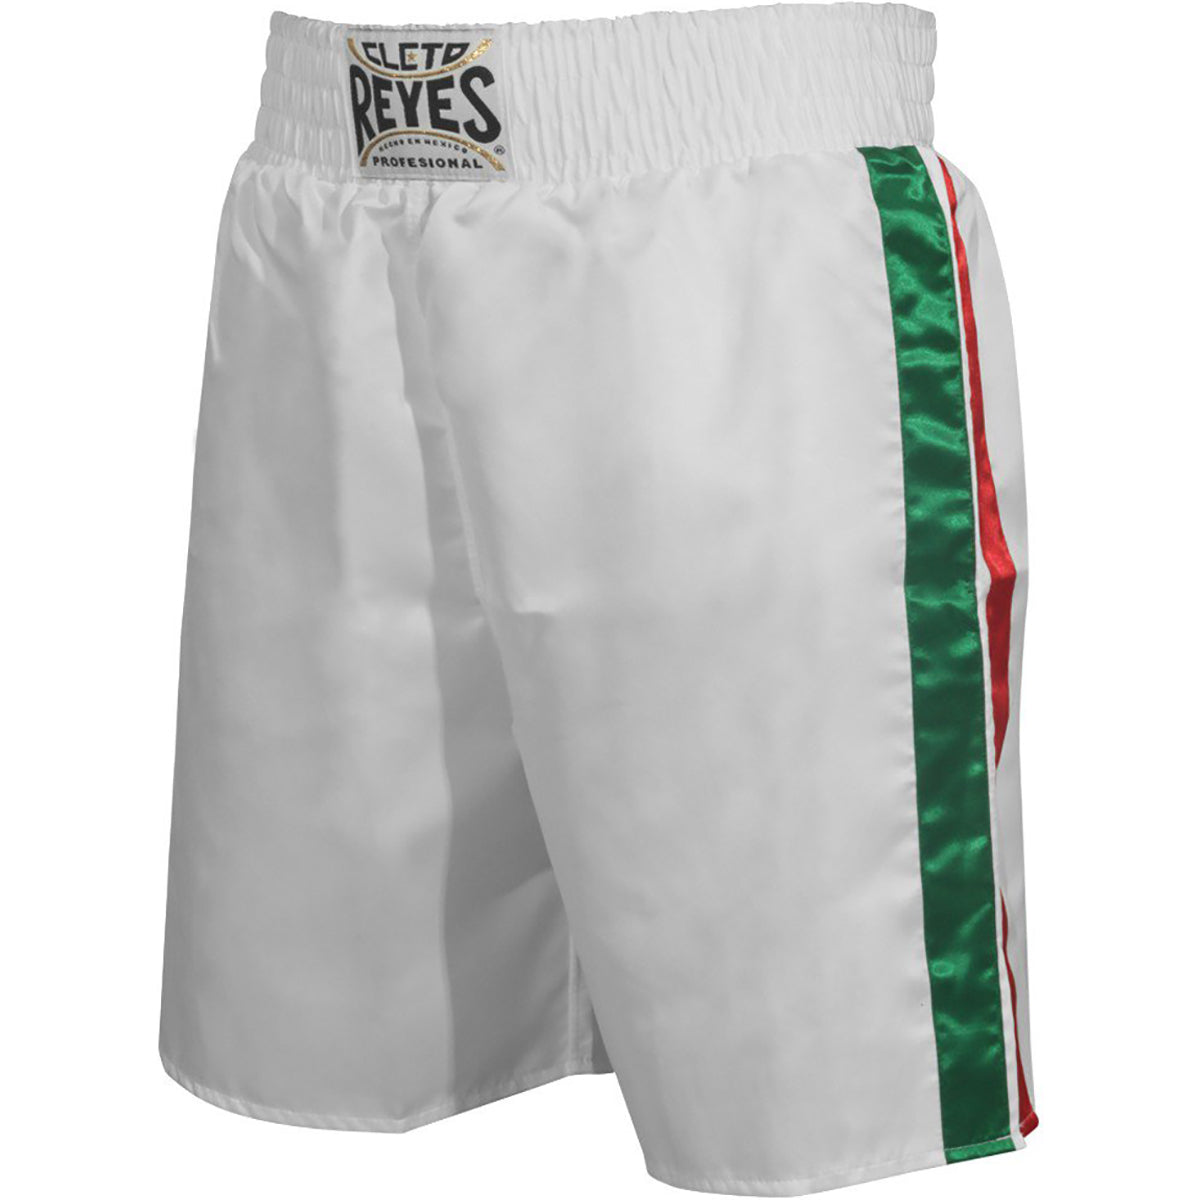 Cleto Reyes Satin Classic Boxing Trunks - Mexican Flag Cleto Reyes